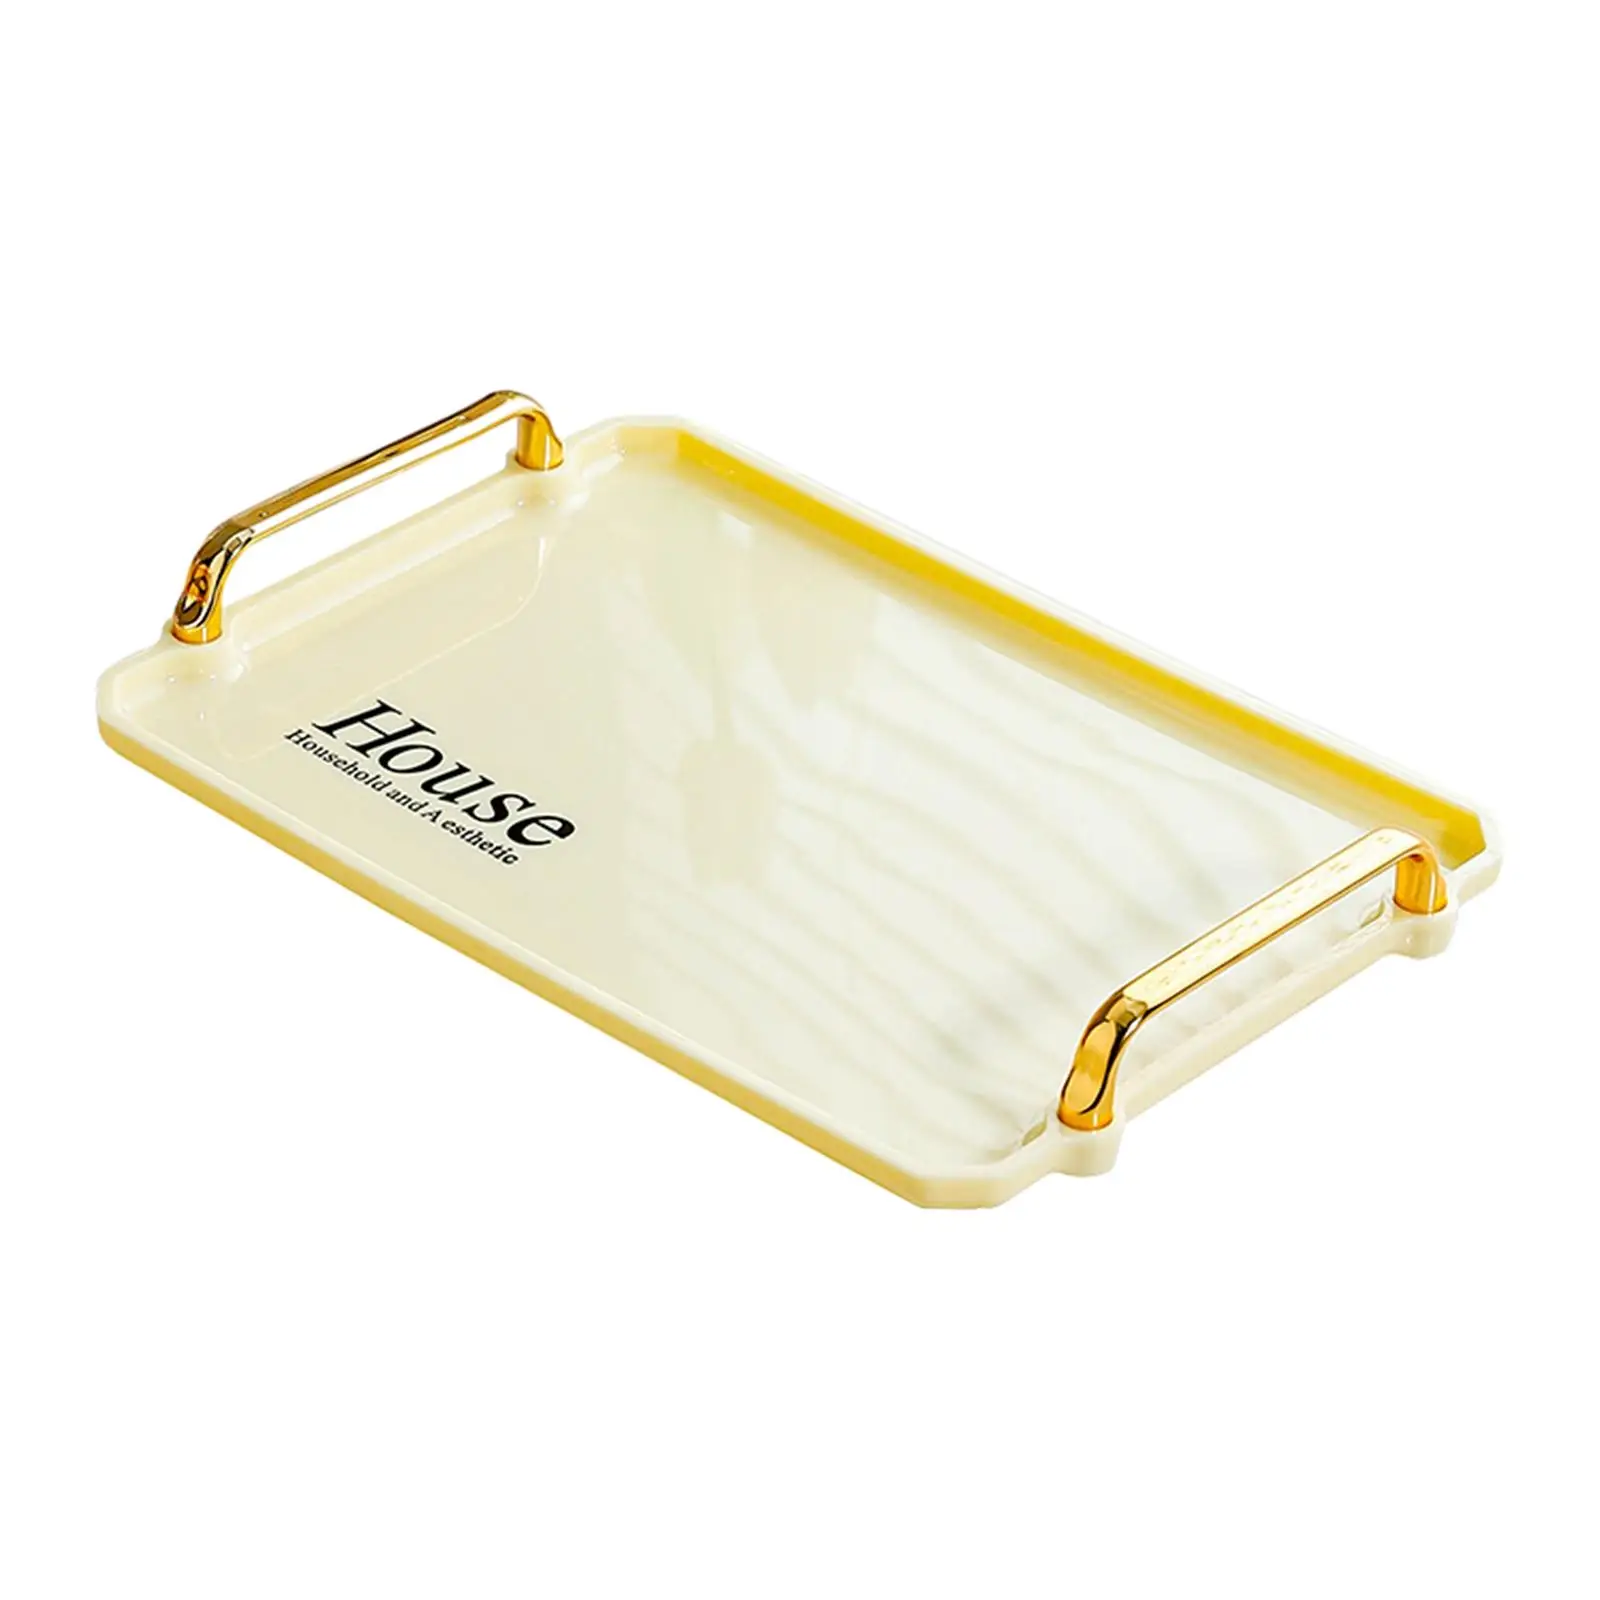 Serving Tray with Gold Handles Storage Multifunctional Practical Ottoman Tray for Party Bathroom Home Bathroom Vanity